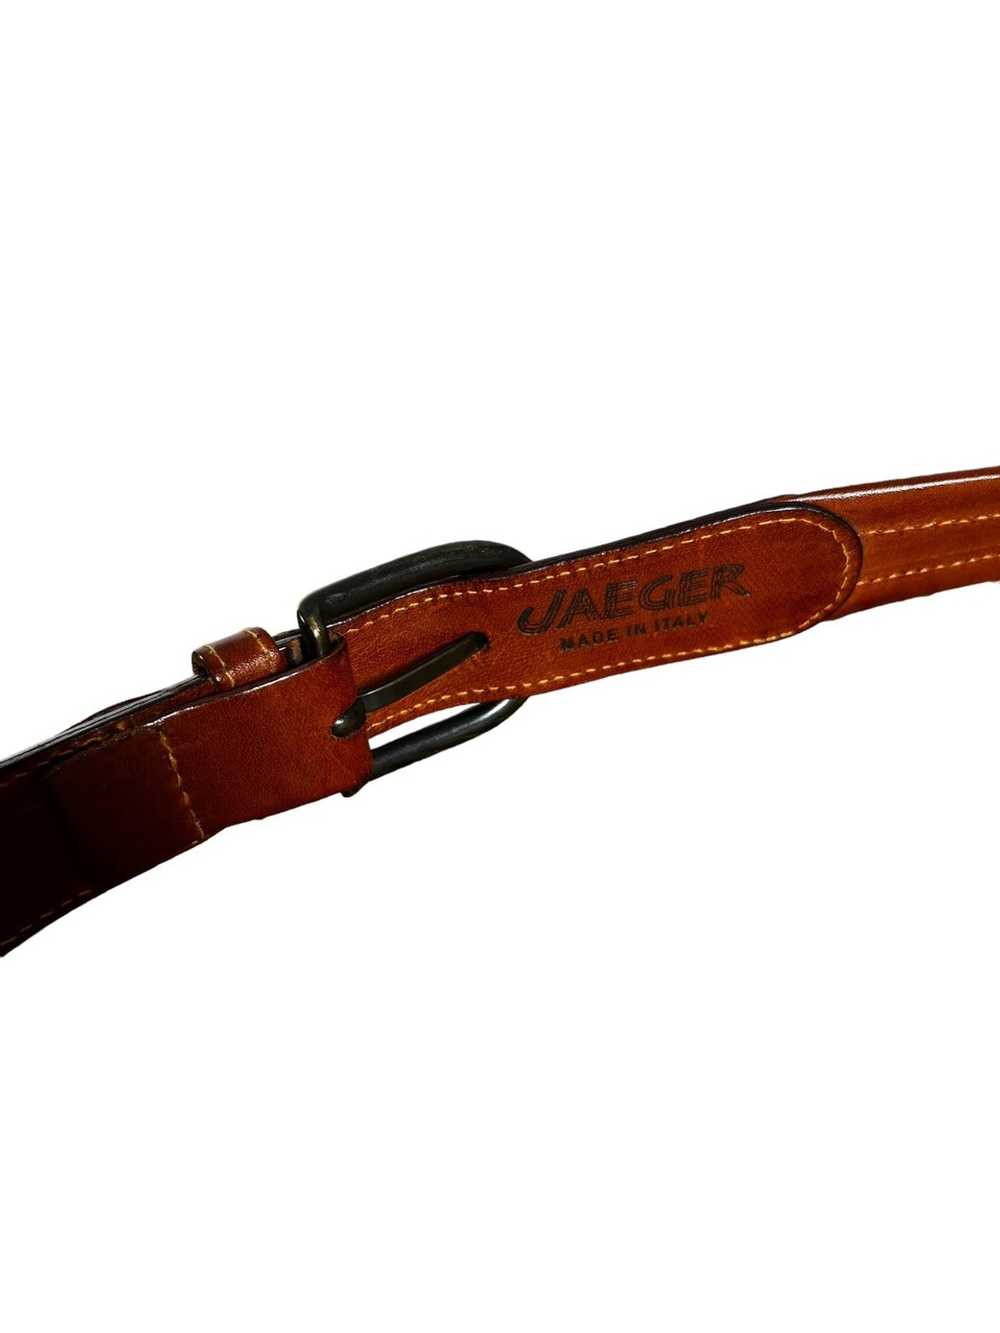 Jaeger Leather Belt Made in Italy - image 2